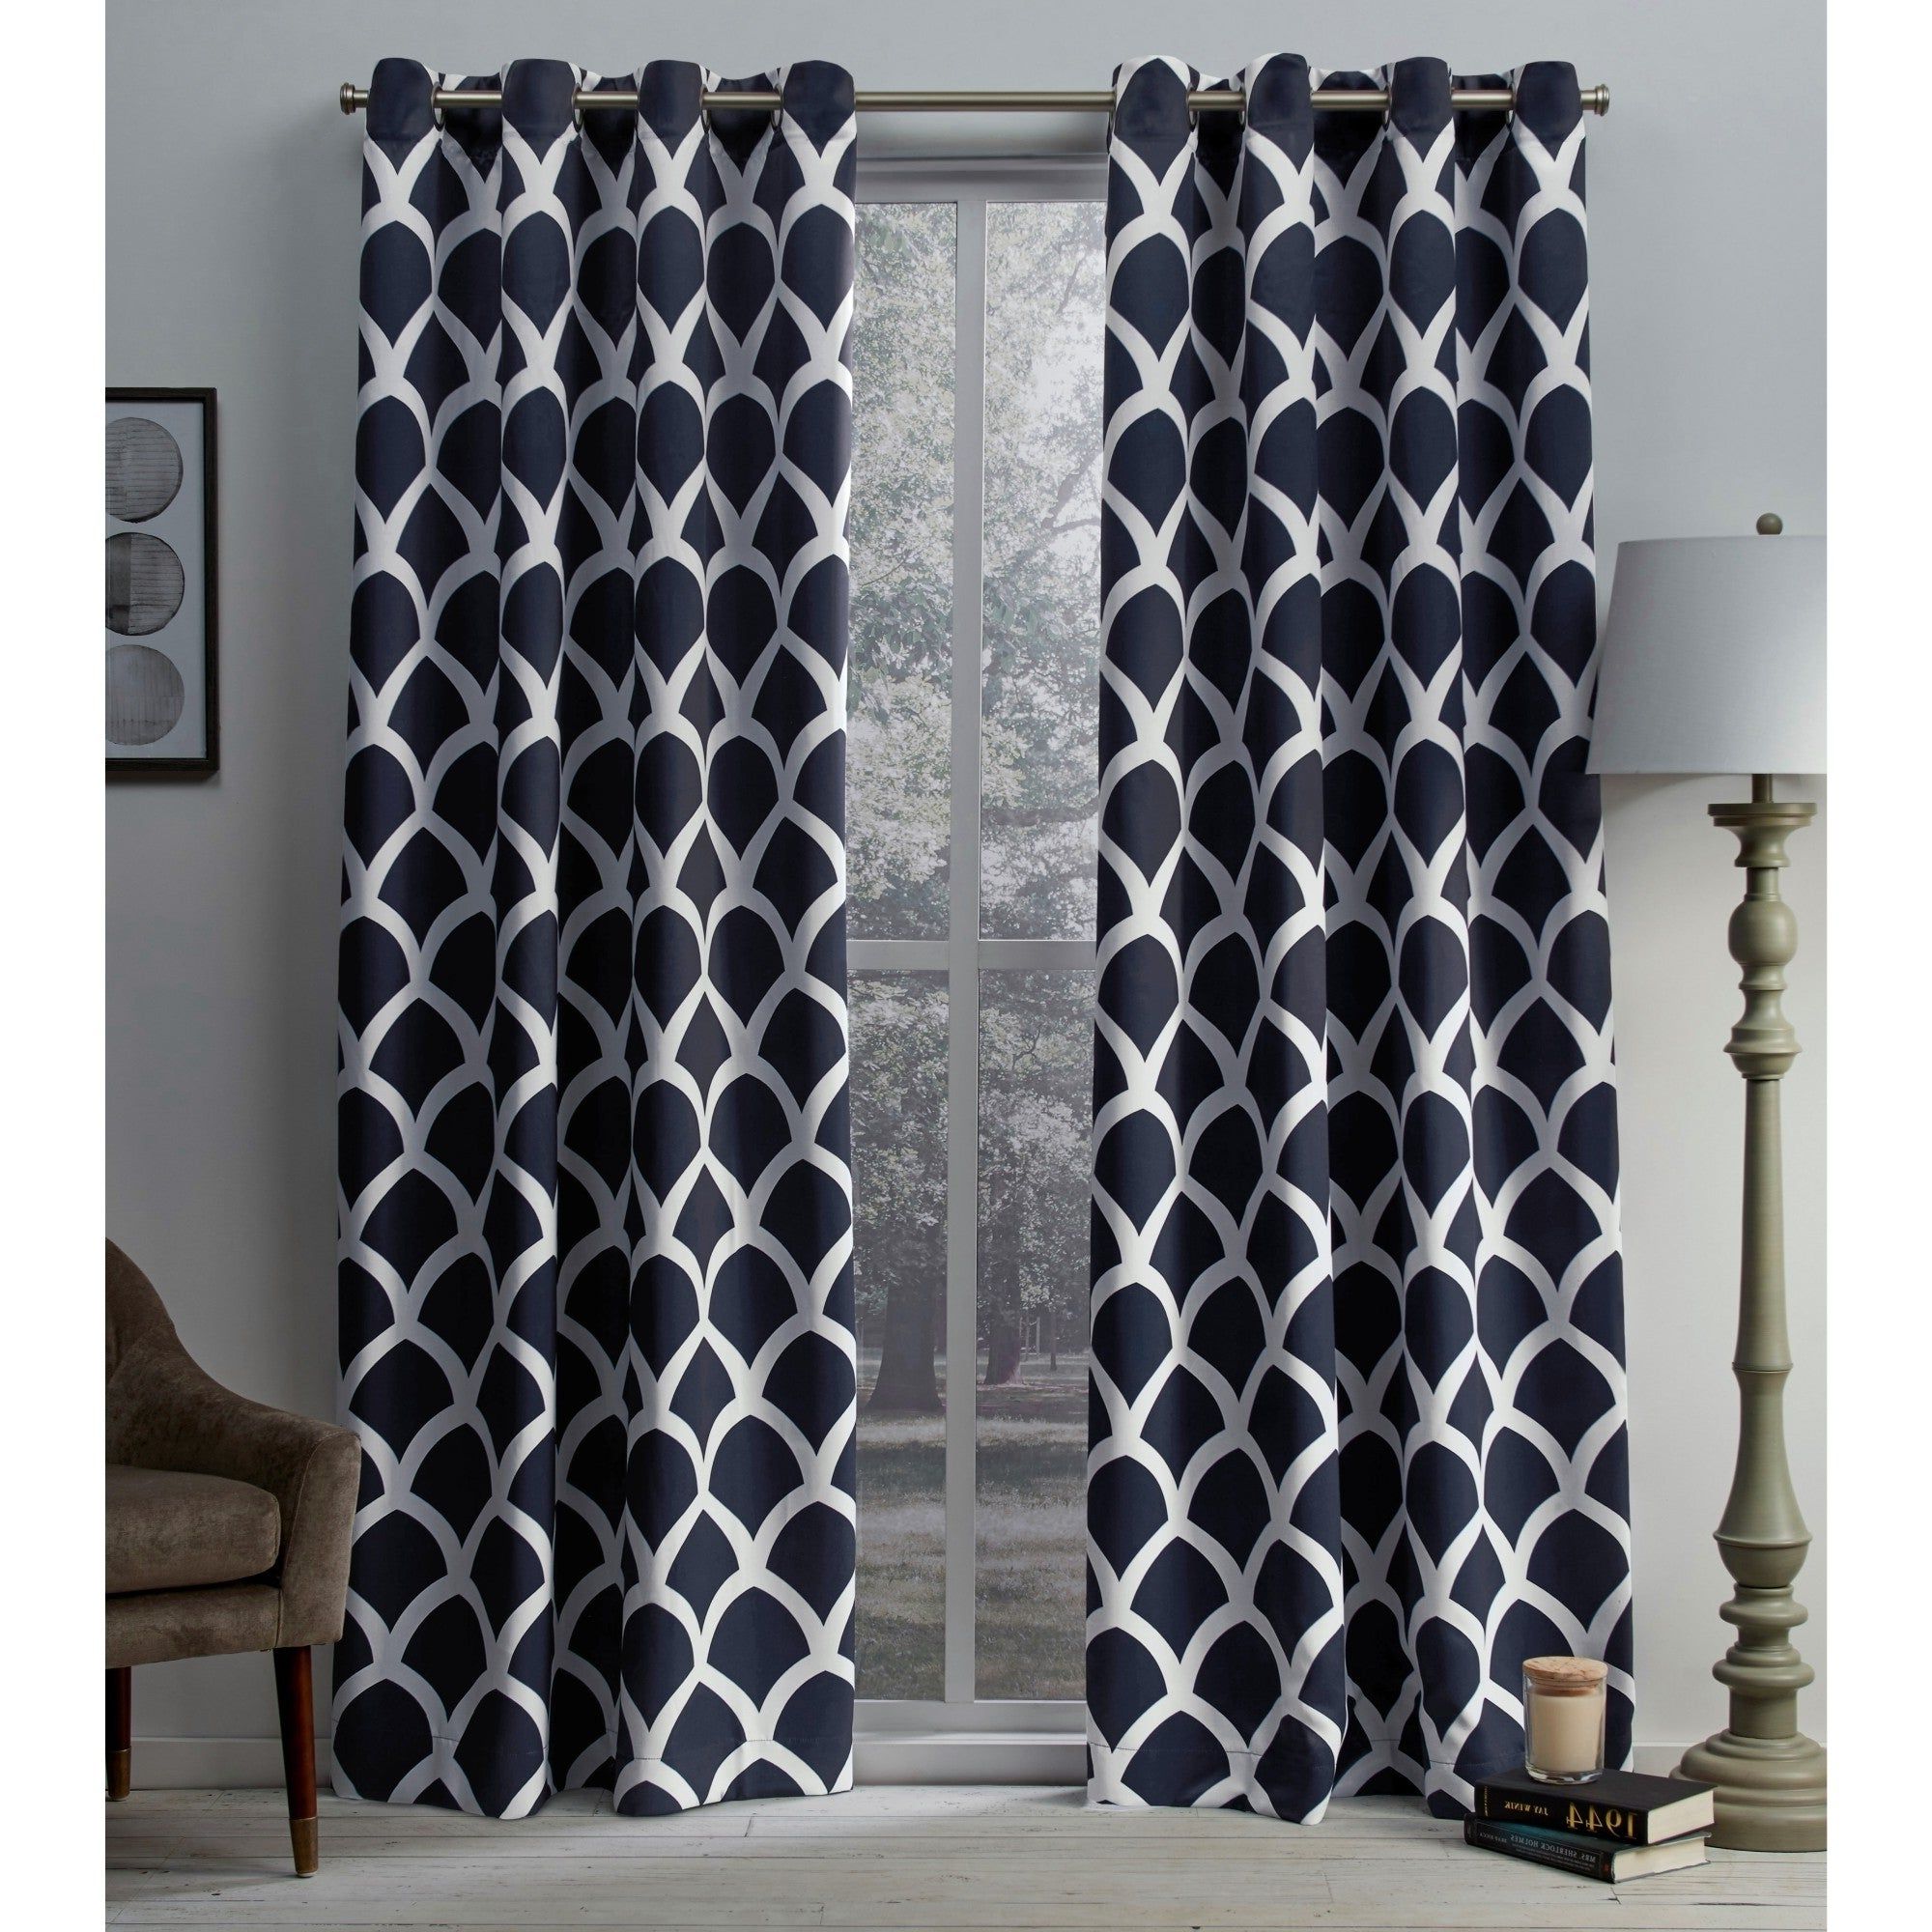 The Curated Nomad Ames Sateen Woven Blackout Grommet Top Curtain Panel Pair With Most Recently Released The Curated Nomad Duane Blackout Curtain Panel Pairs (View 14 of 20)